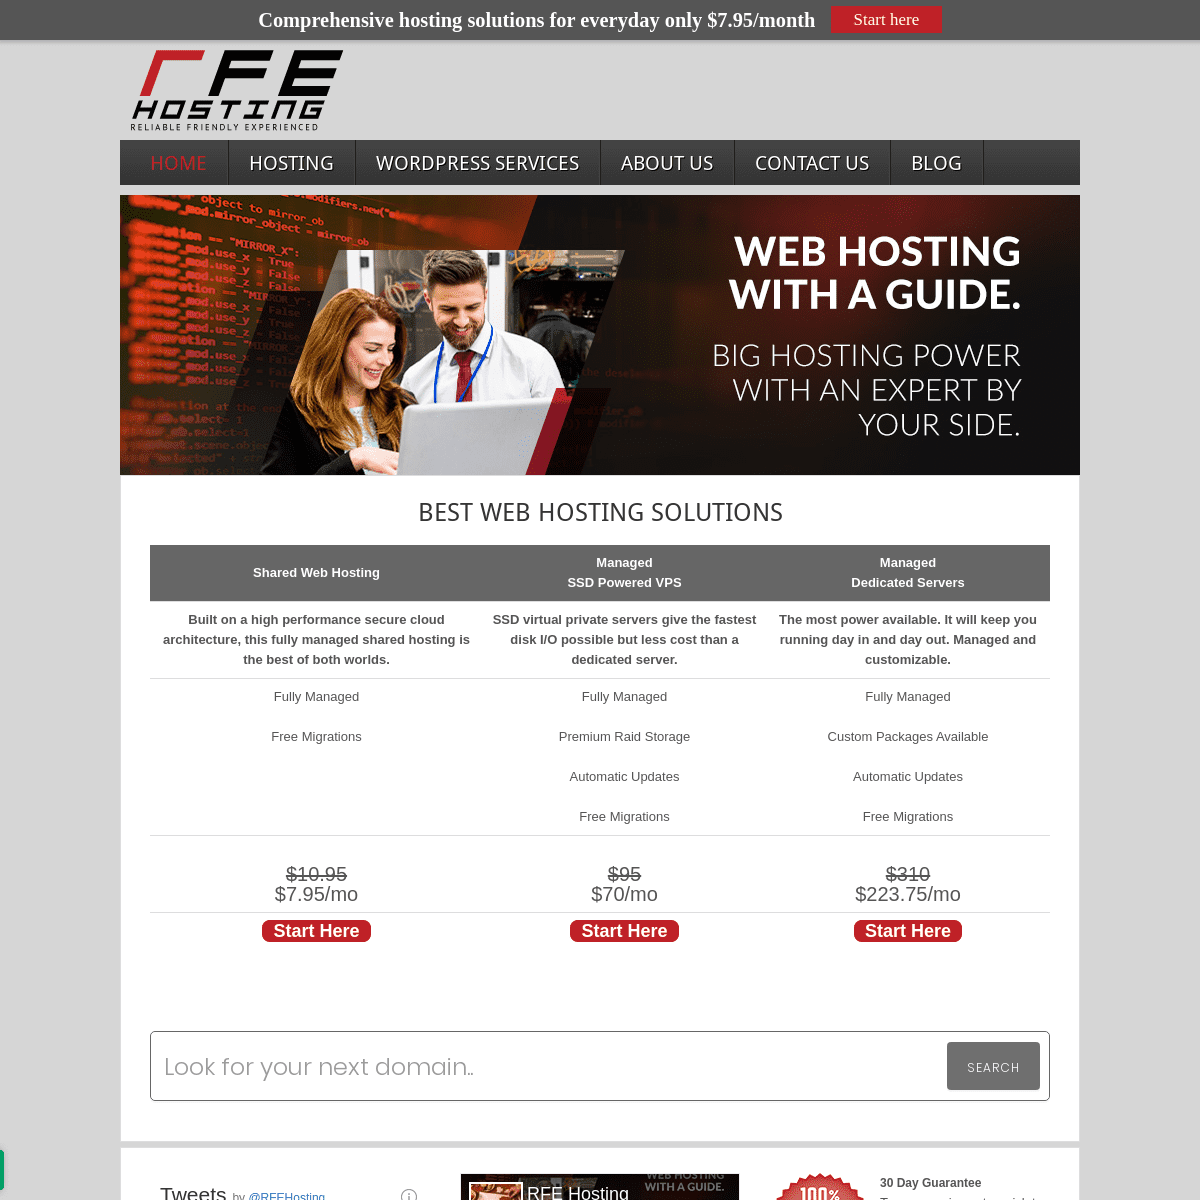 A complete backup of rfehosting.com